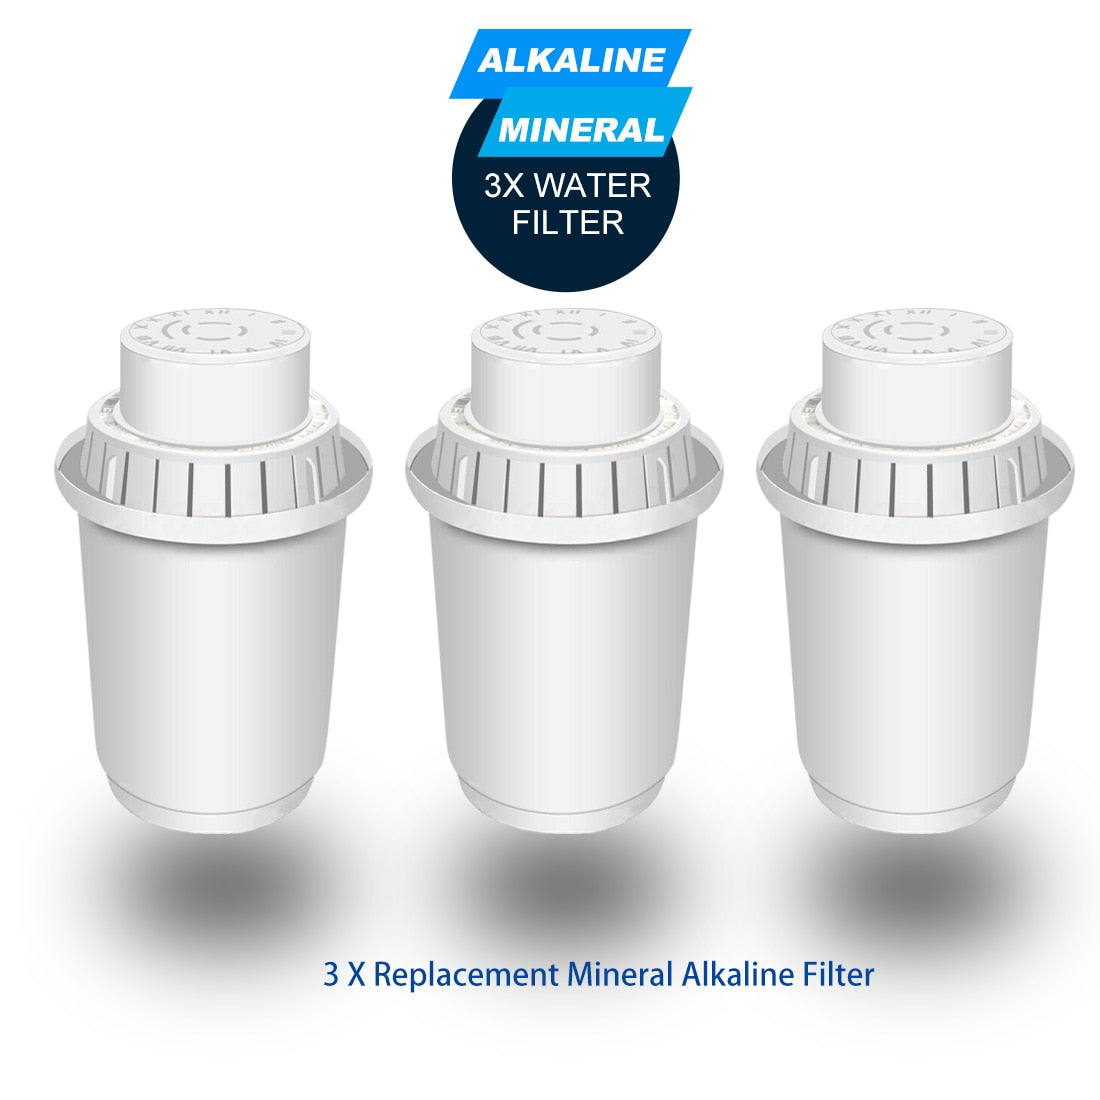 ALTHY 3.5L Mineral Alkaline Water Pitcher Filter - 400L Long-Life Filters - Alkalizer Purifier Filtration System +pH -ORP 3xReplaceFilterChina Hardware > Plumbing > Water Dispensing & Filtration 69.07 EZYSELLA SHOP